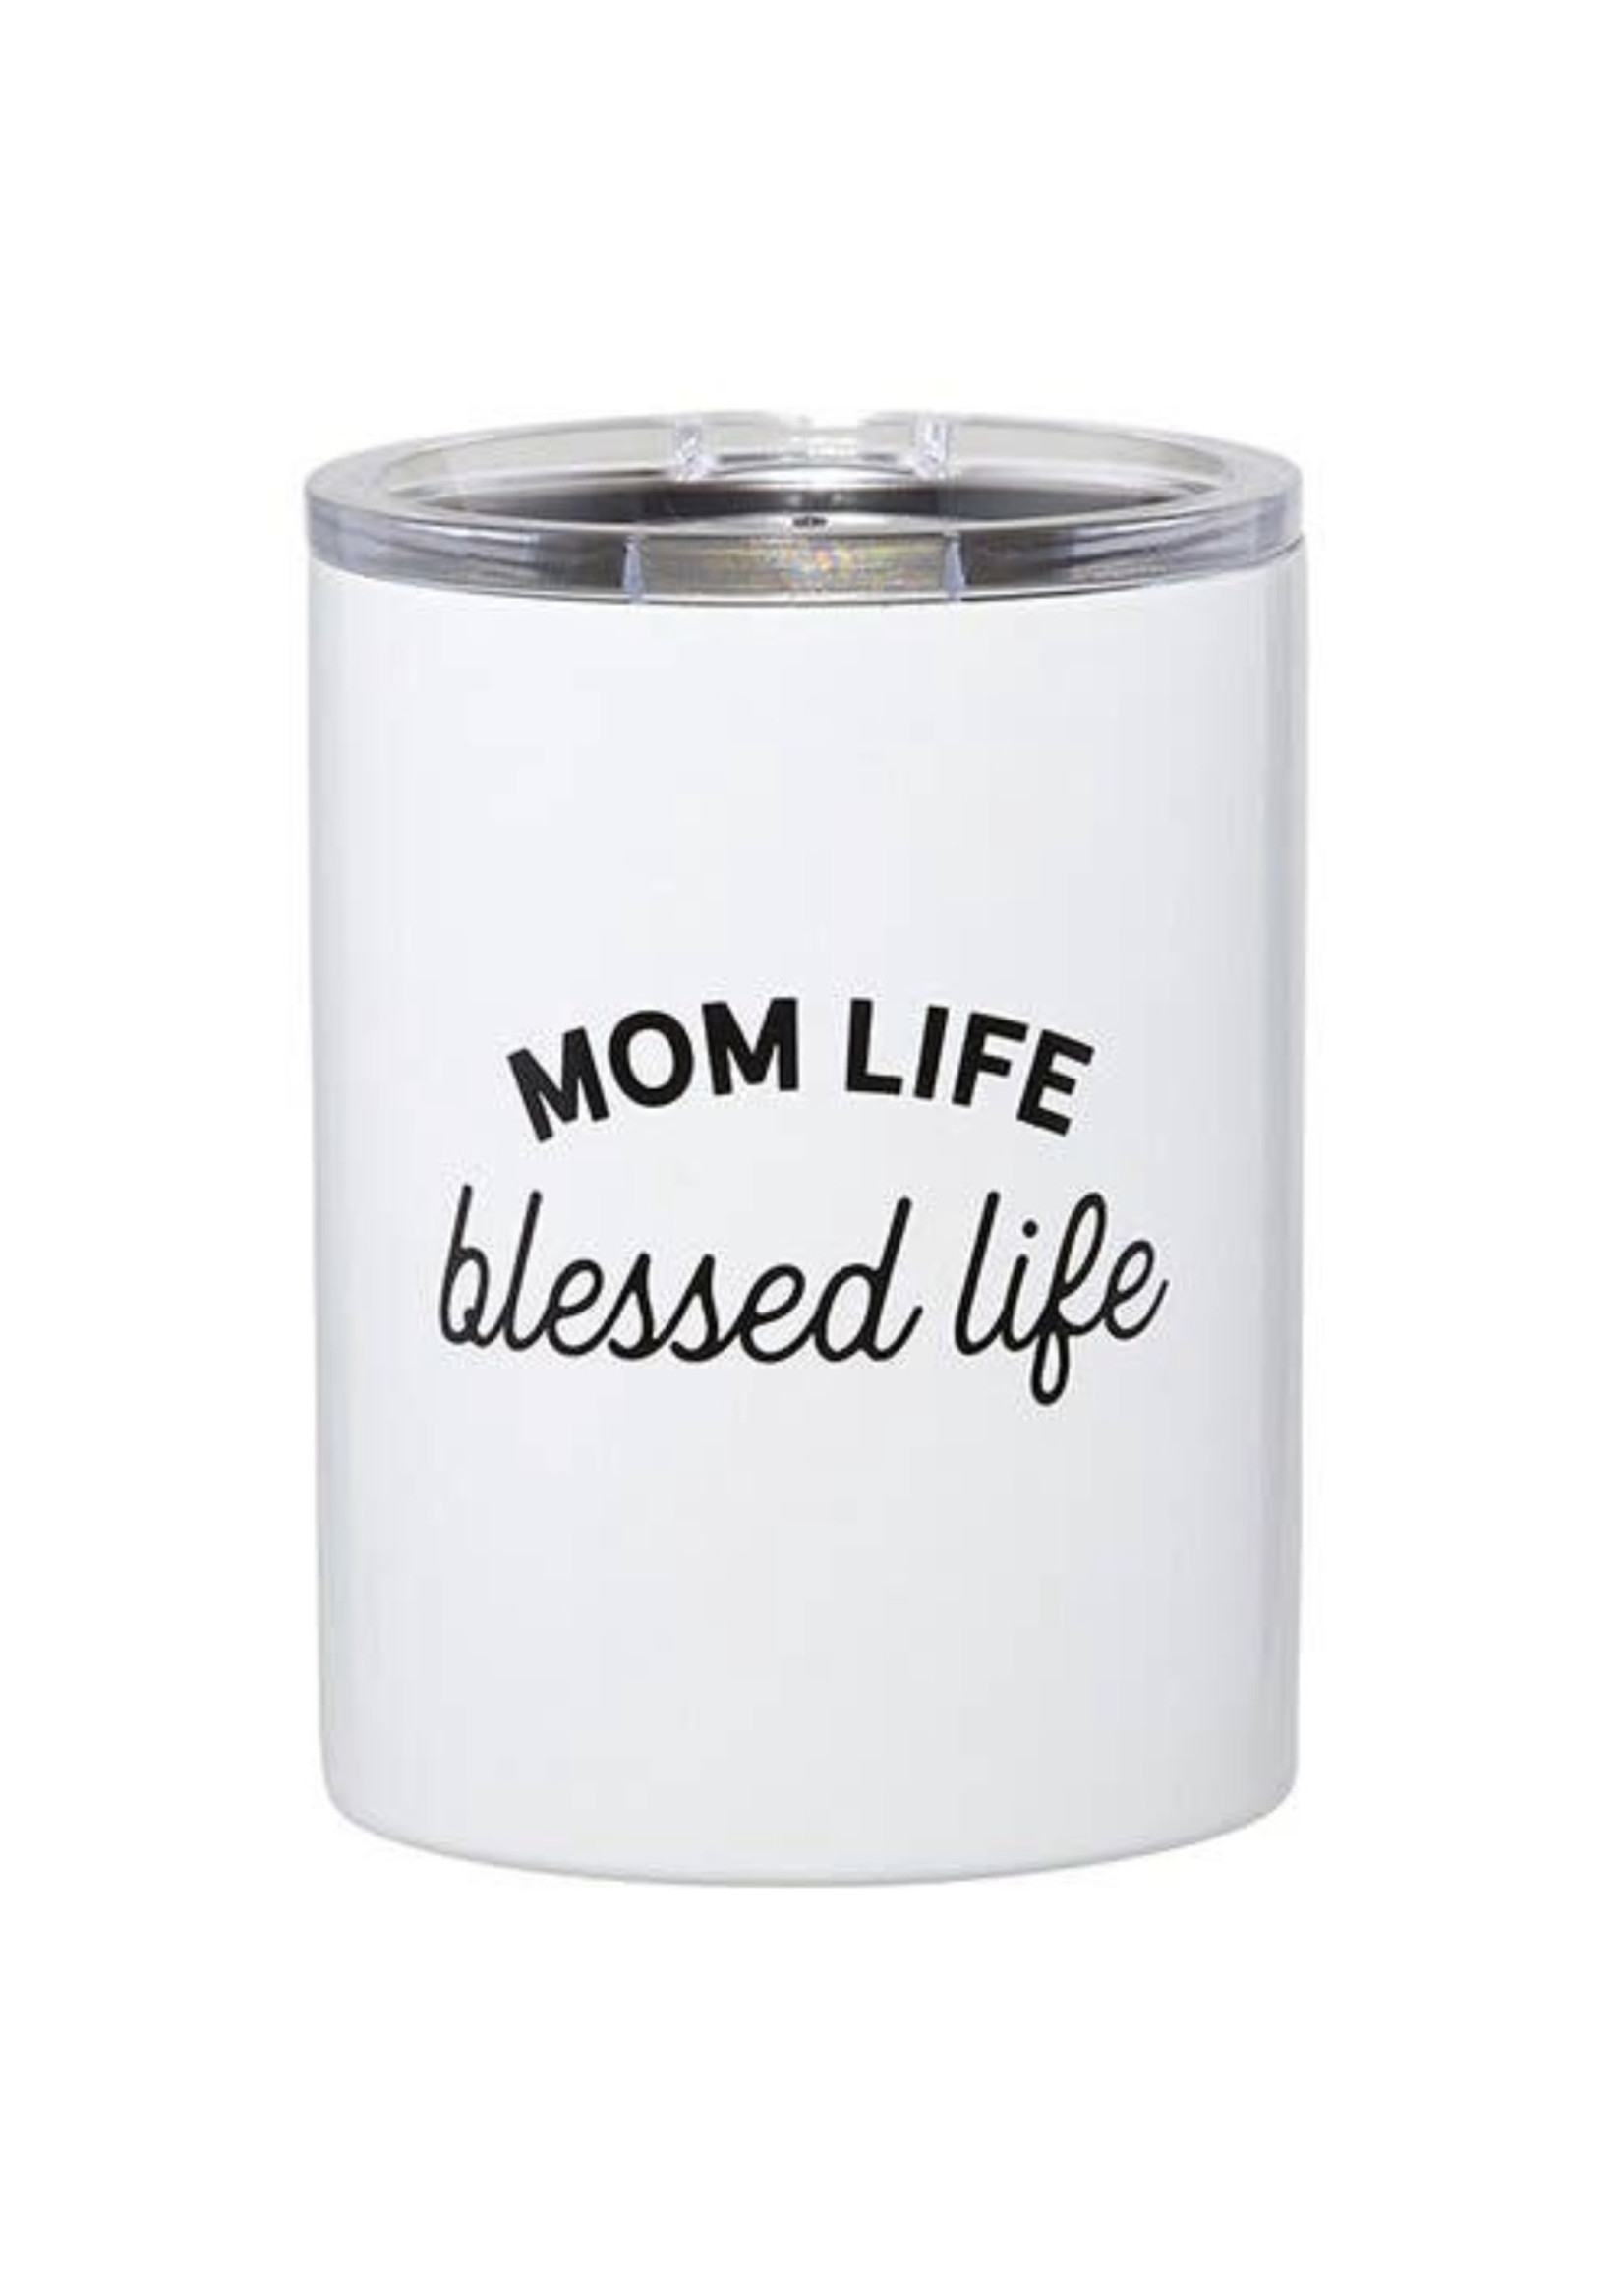 Divinity Boutique Mom Life coffee tumbler